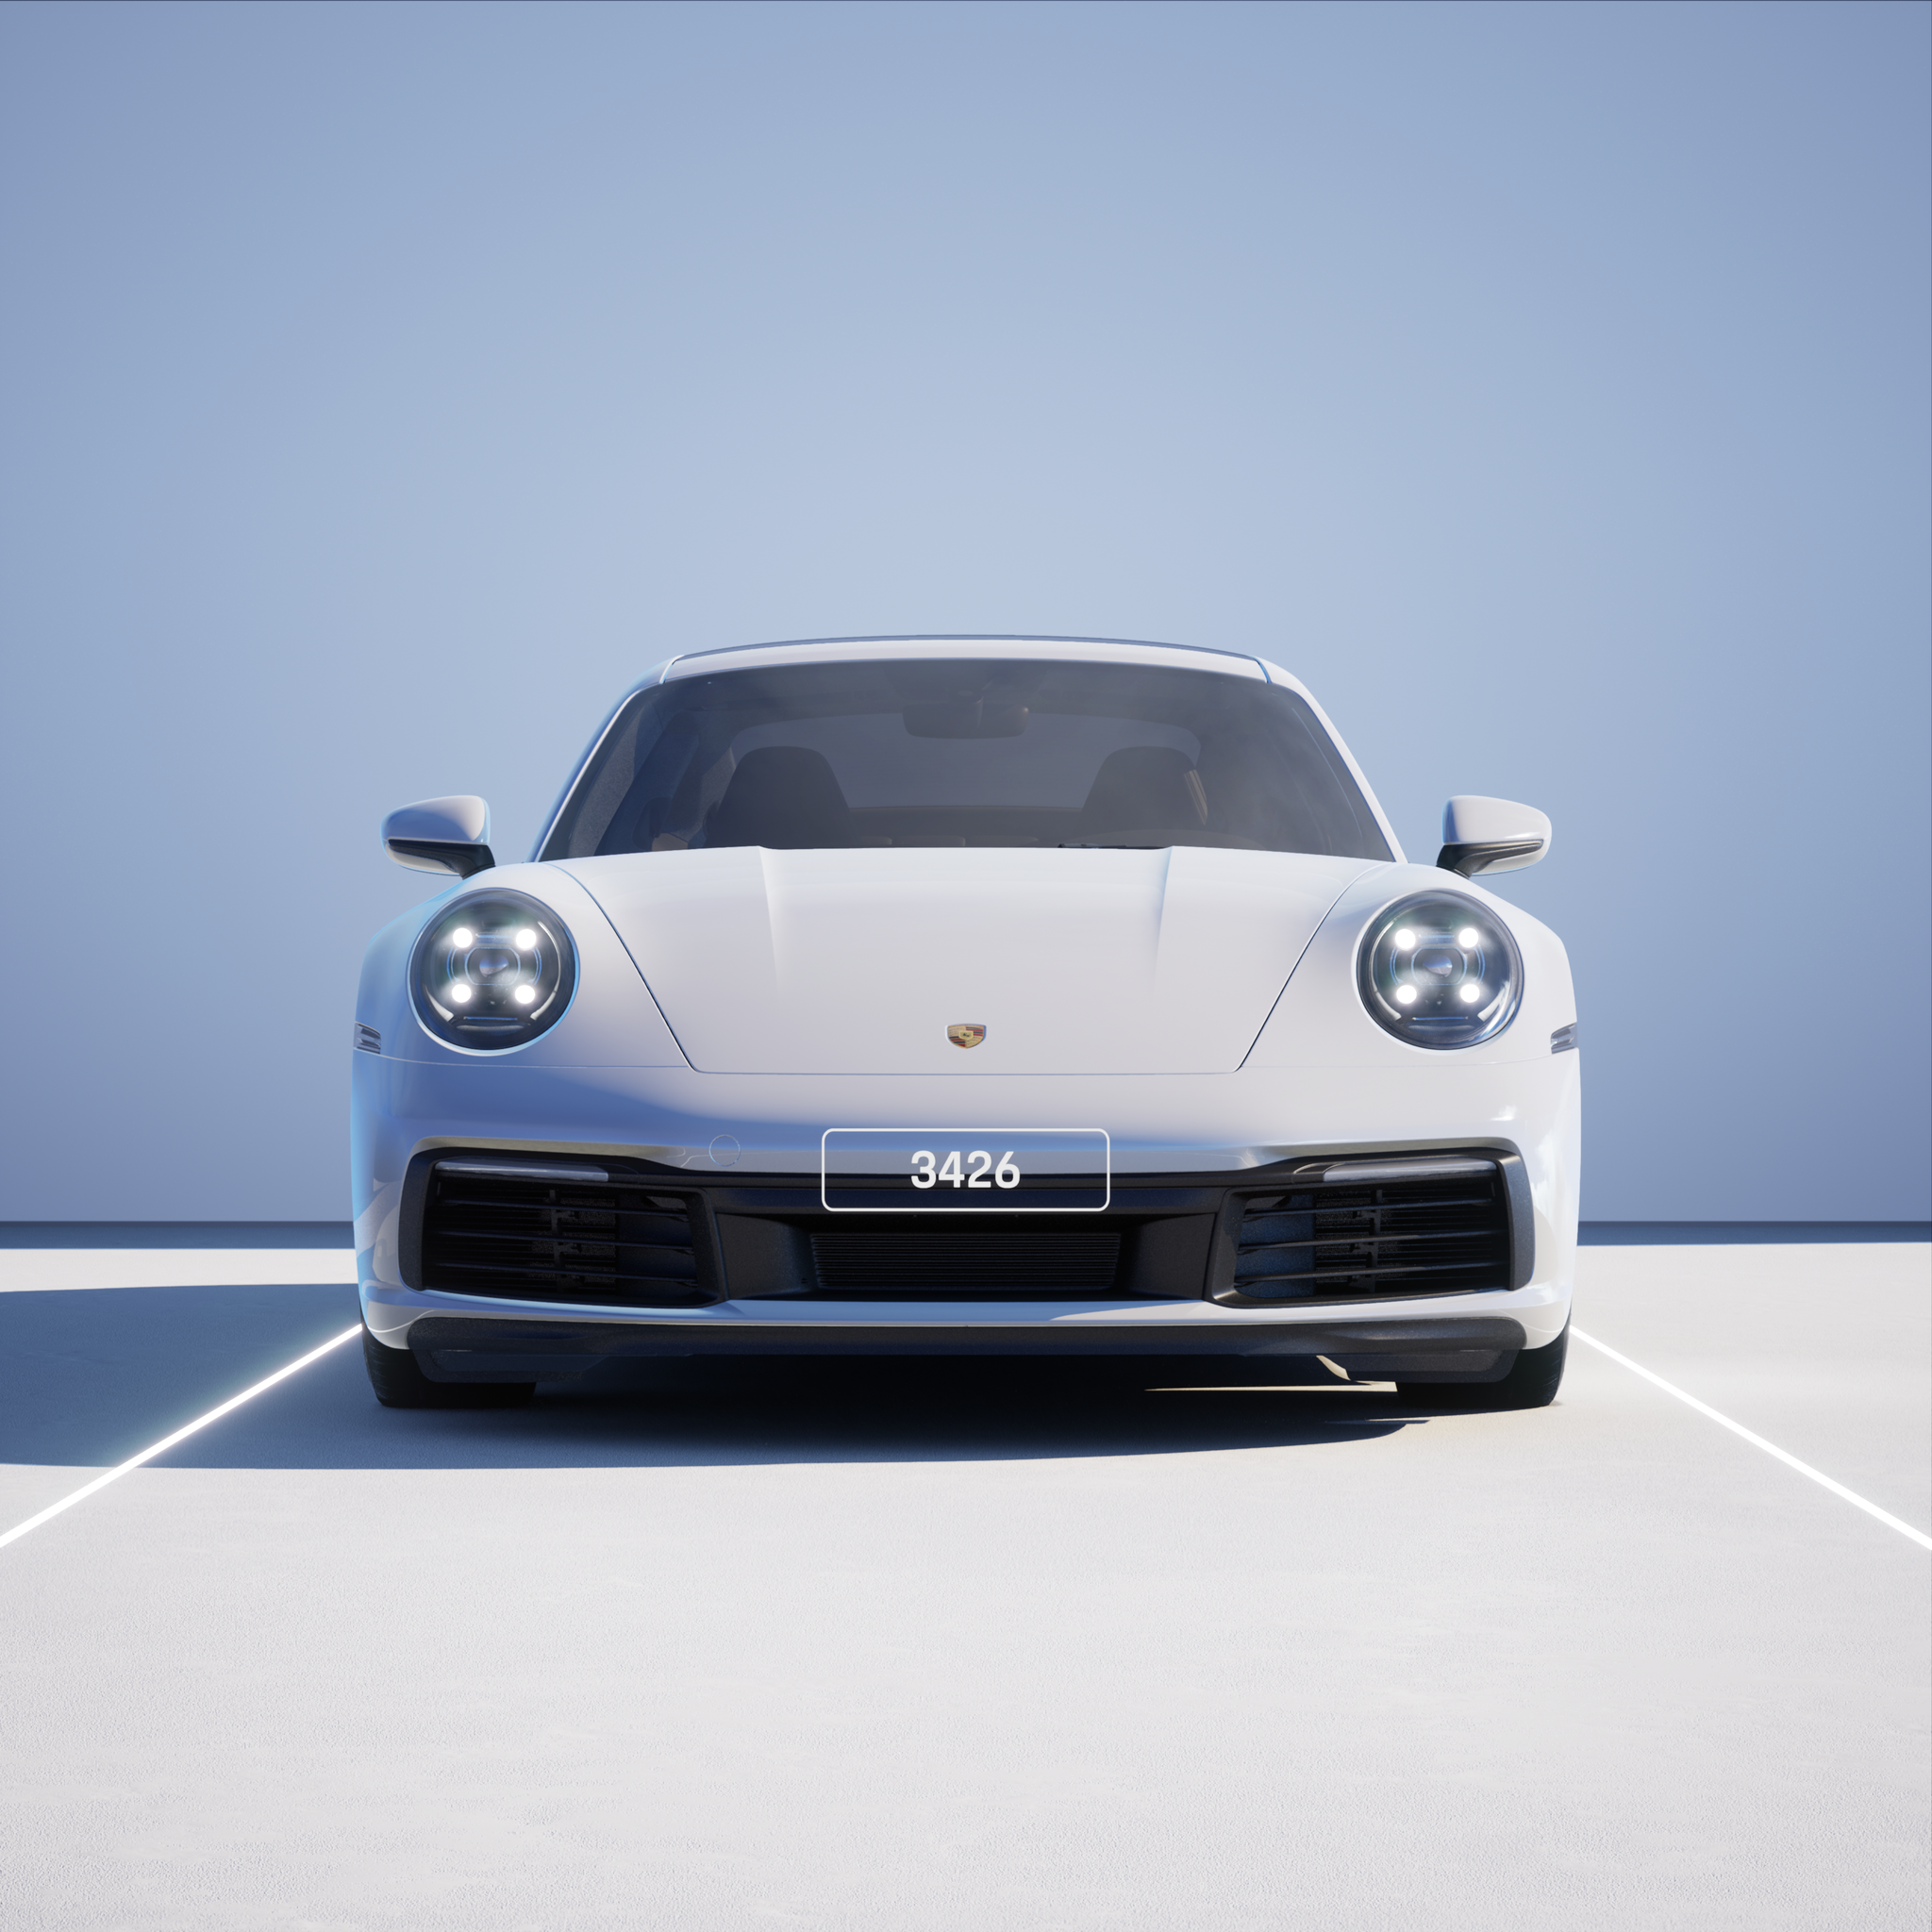 The PORSCHΞ 911 3426 image in phase